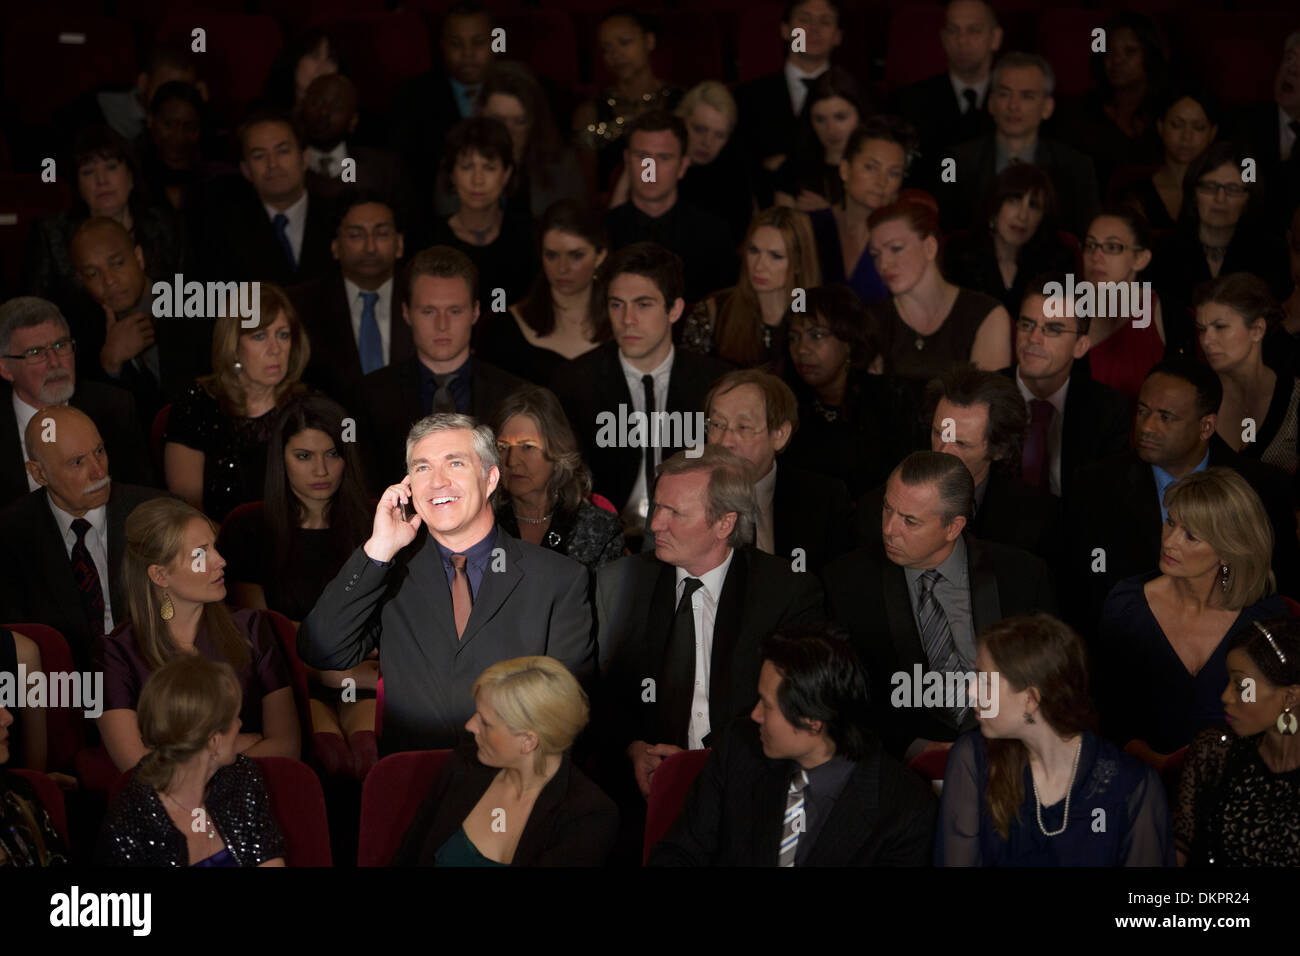 Man talking on cell phone in theater audience Banque D'Images